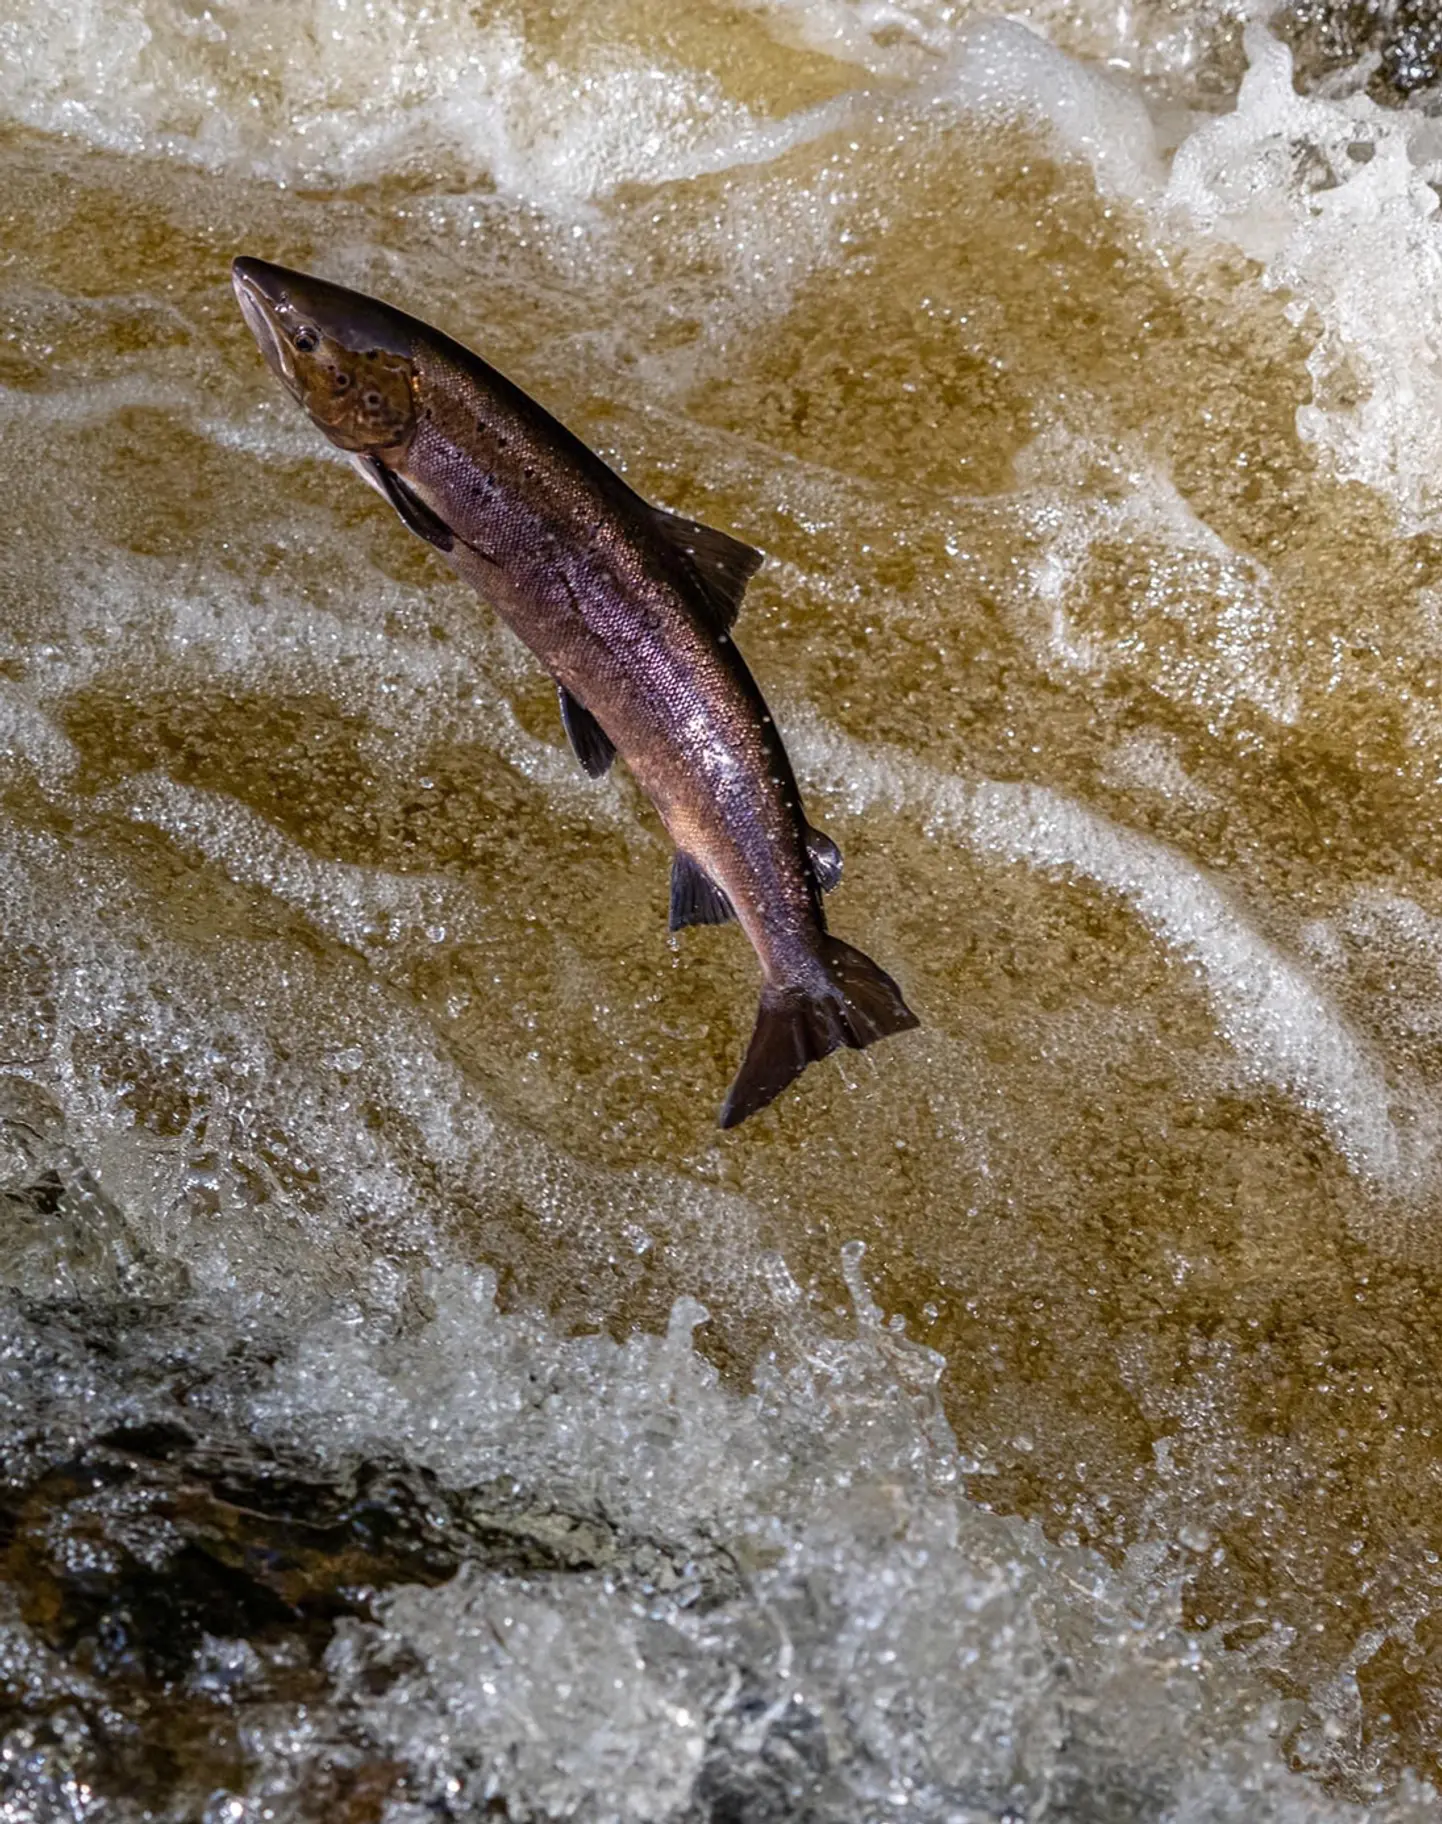 Near a foamy water’s edge, a salmon leaps up-stream. Its purple- hued scales catch the sunlight. Below the water surface is a light, sandy coloured bank. A large fin and smaller fin on its back, smaller fins on its underbelly. 